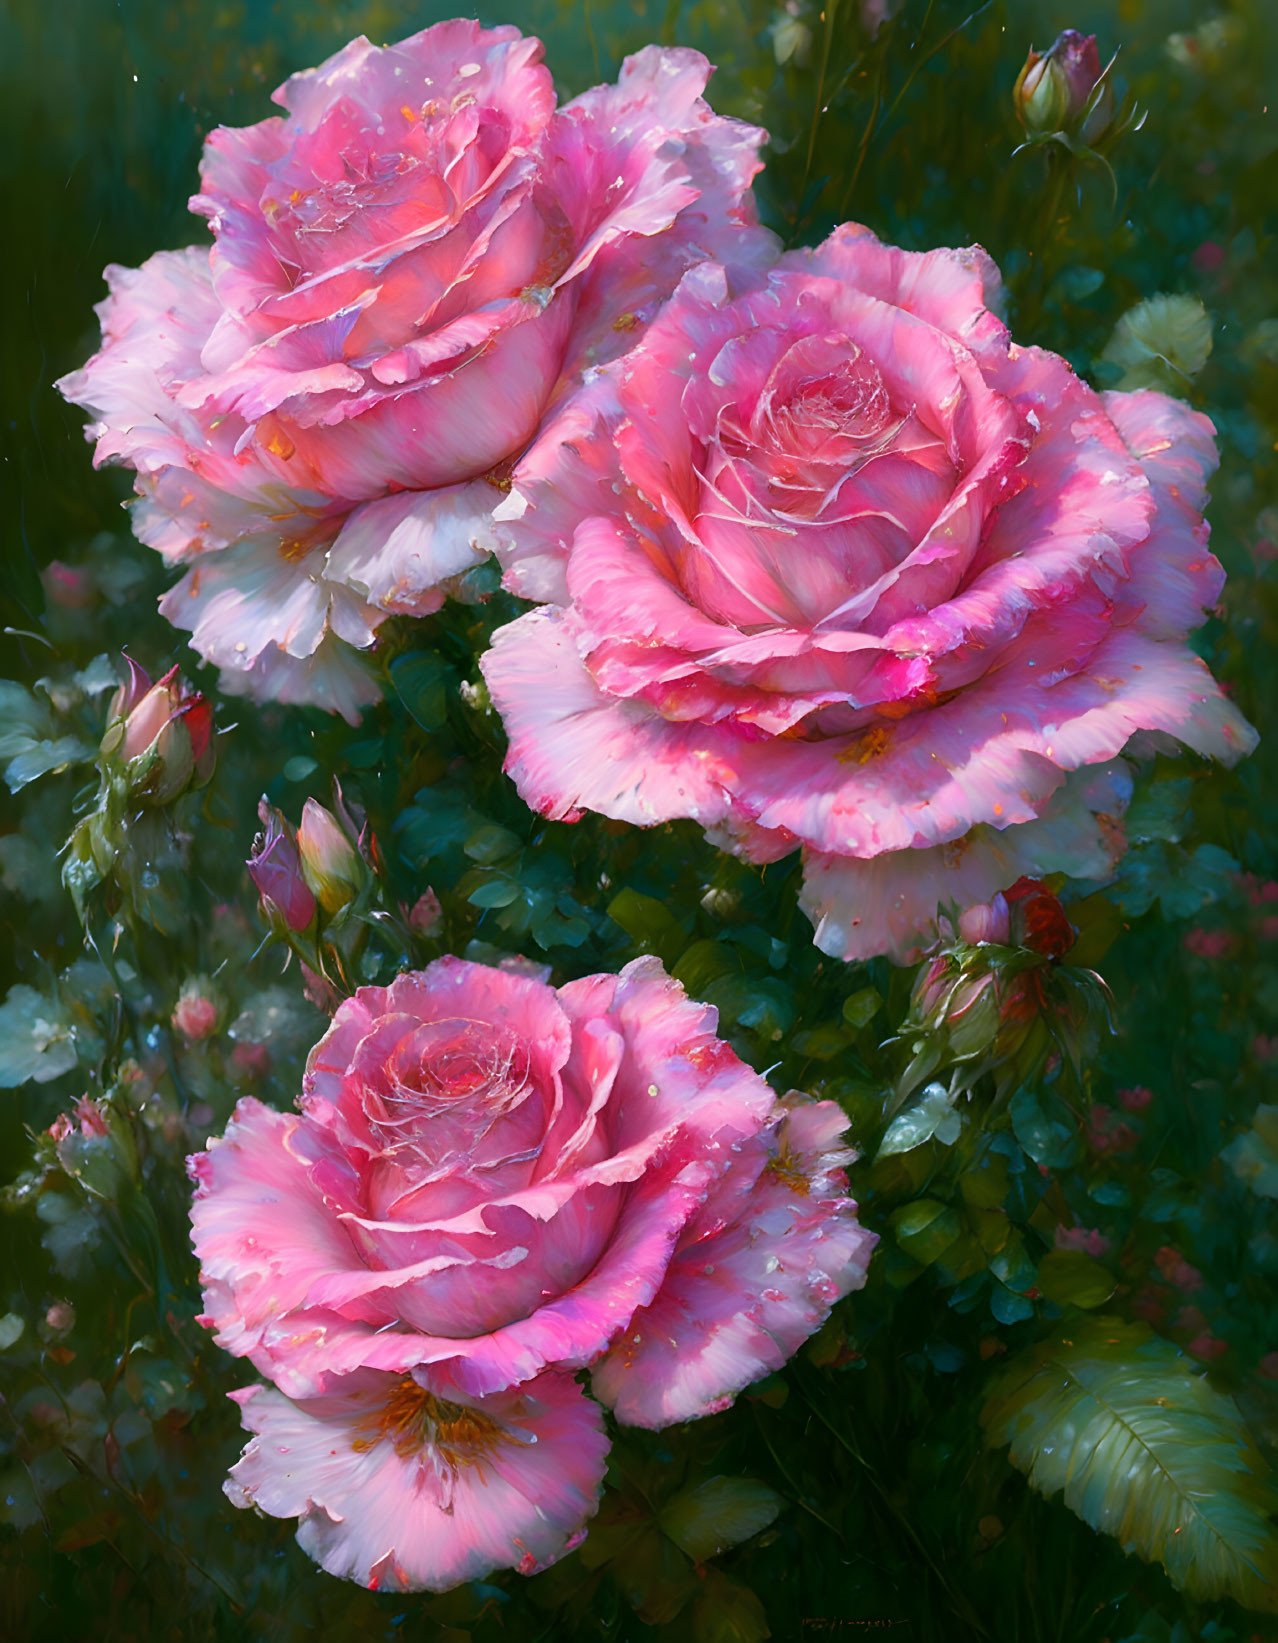 Three pink-edged white roses with green leaves and buds on blurred background